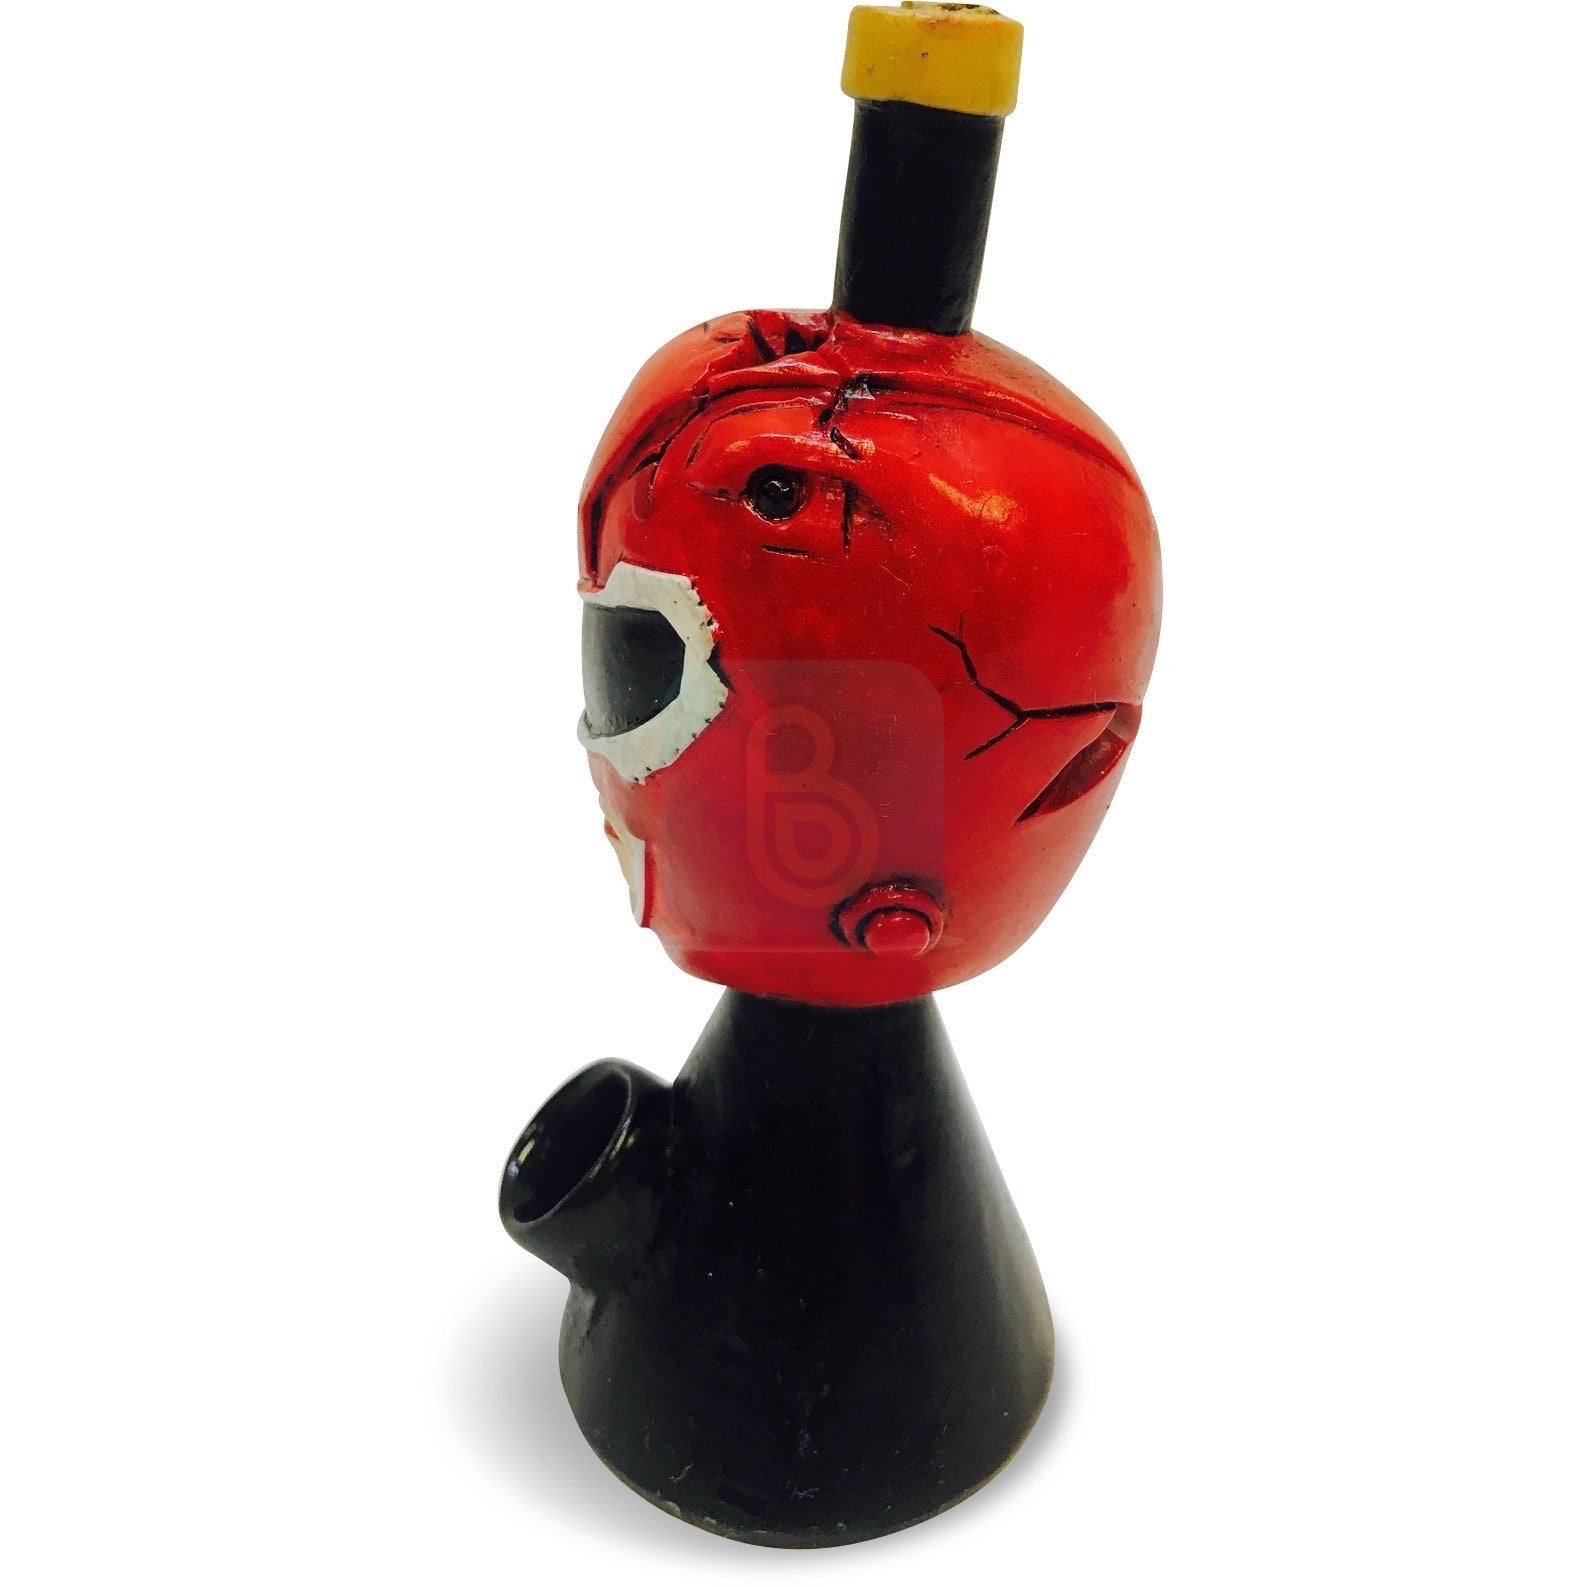 Resin Pipe - Hippie Power Pipes Puff Wholesale 